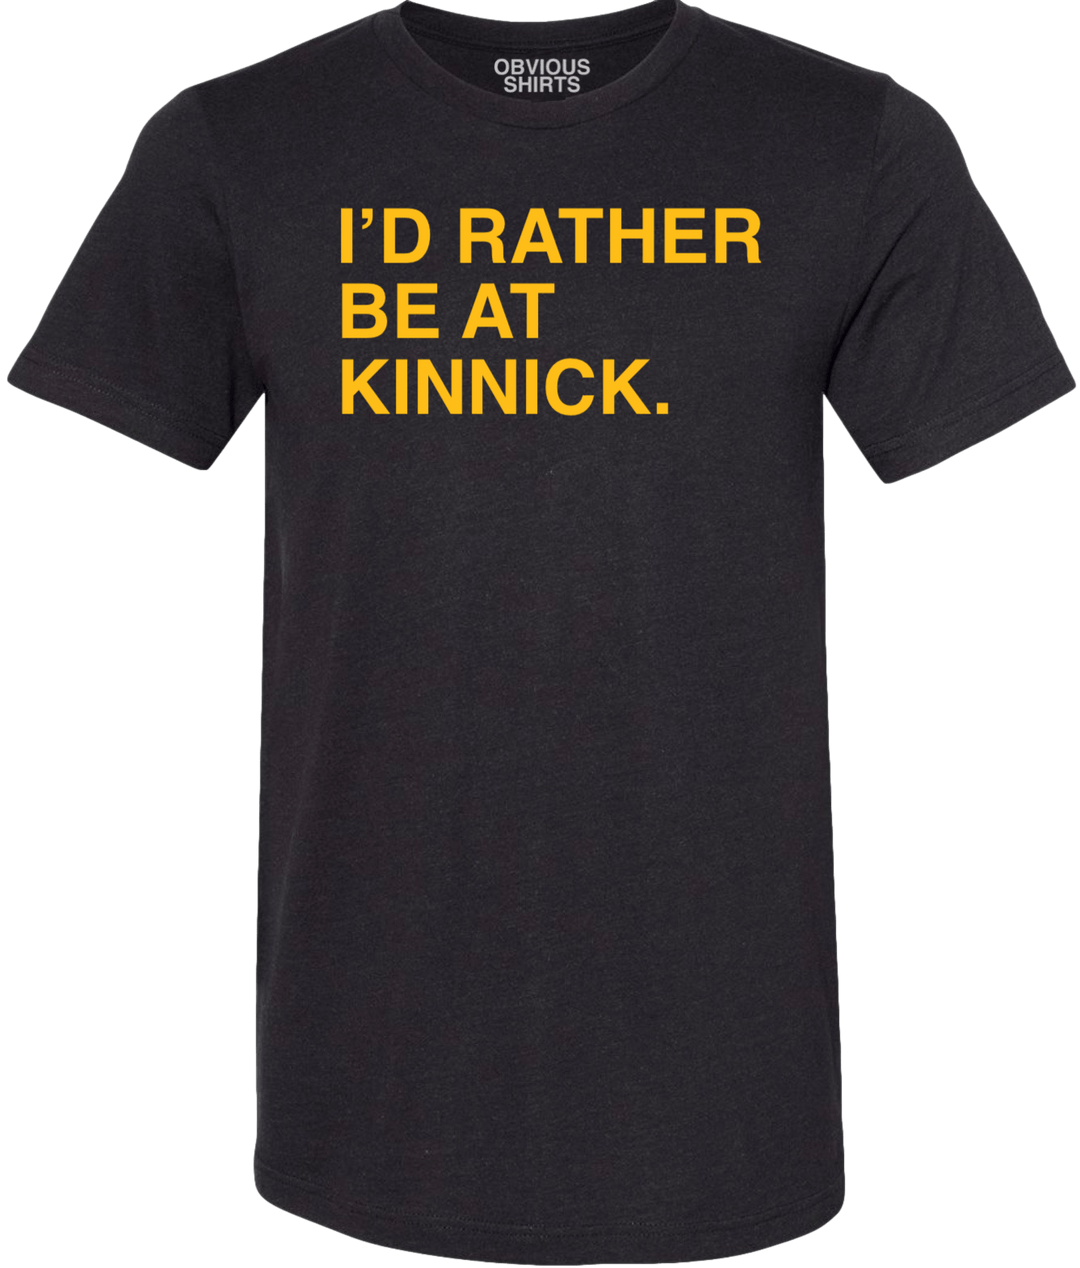 I'D RATHER BE AT KINNICK. - OBVIOUS SHIRTS